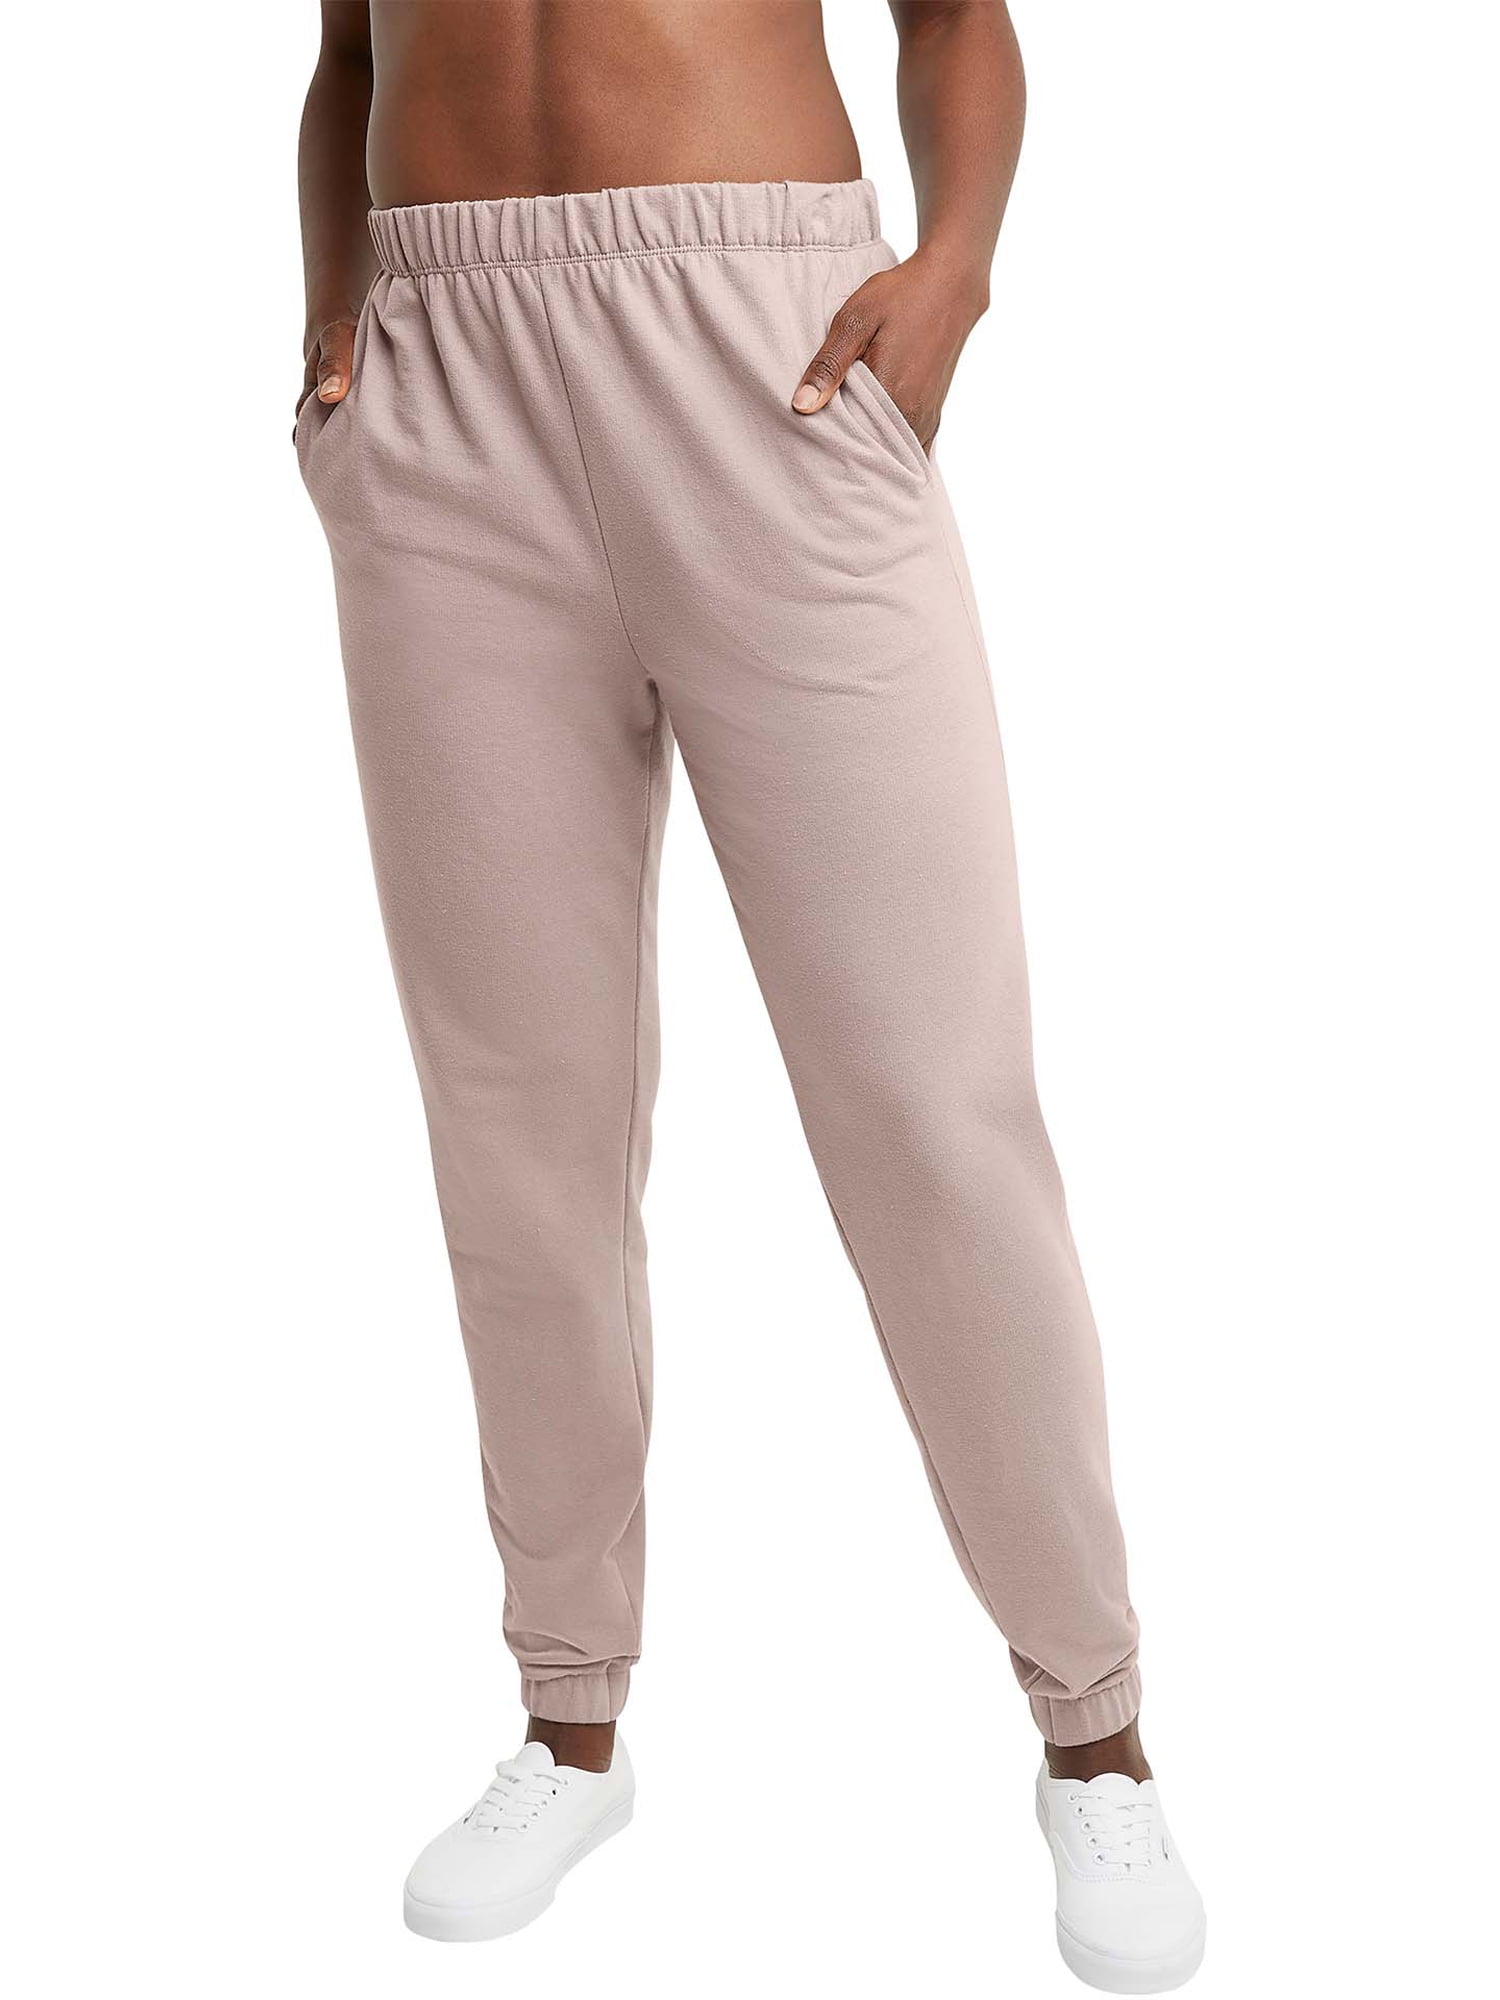 Hanes Originals Women's French Terry Joggers 